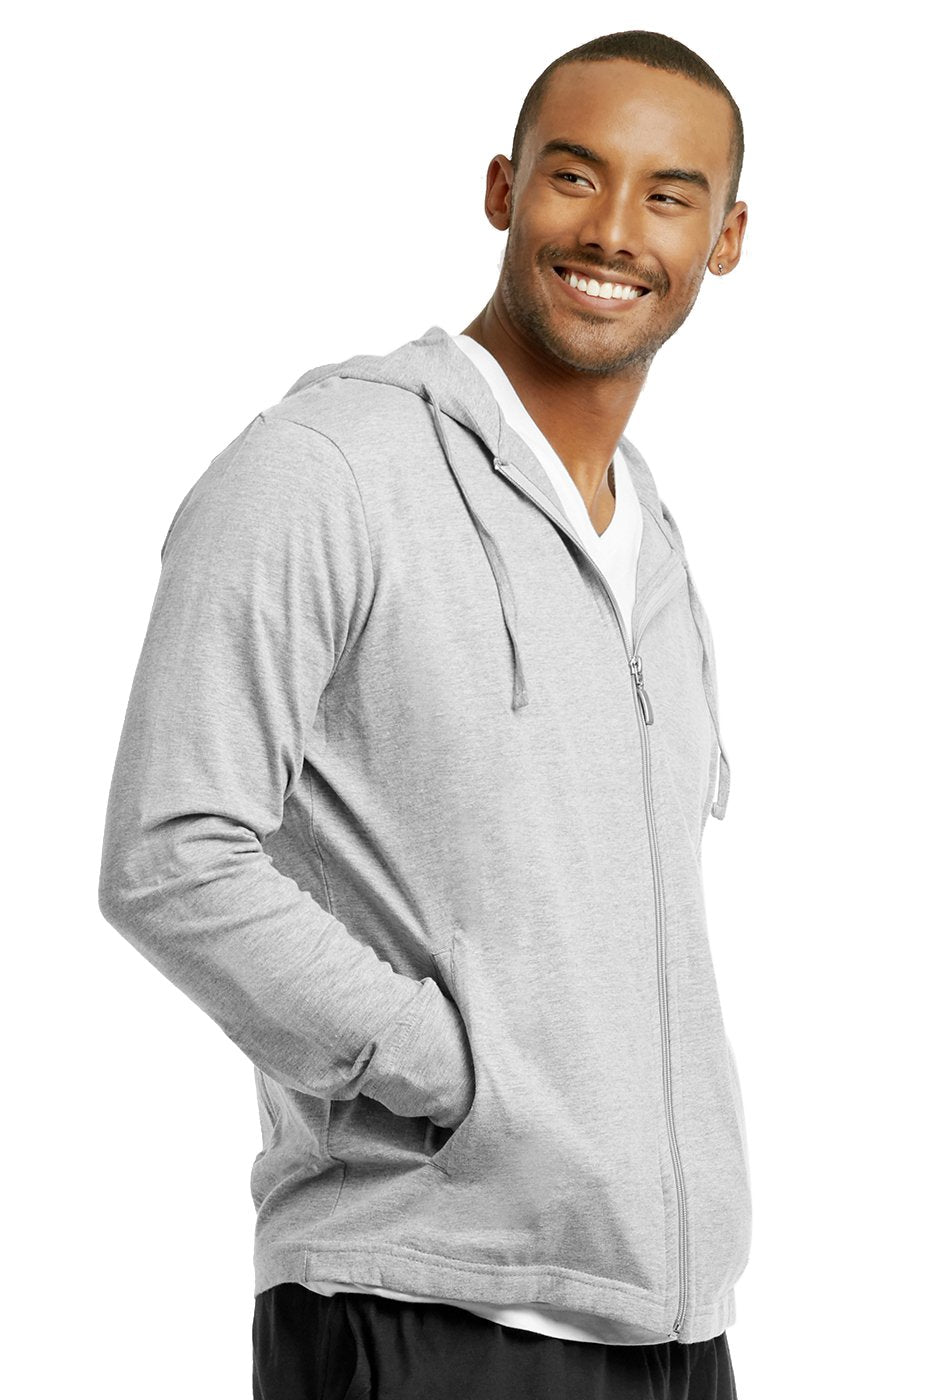 Cotton Jersey Hoodie Jacket for Men Black Small 1 Pack Mens Top